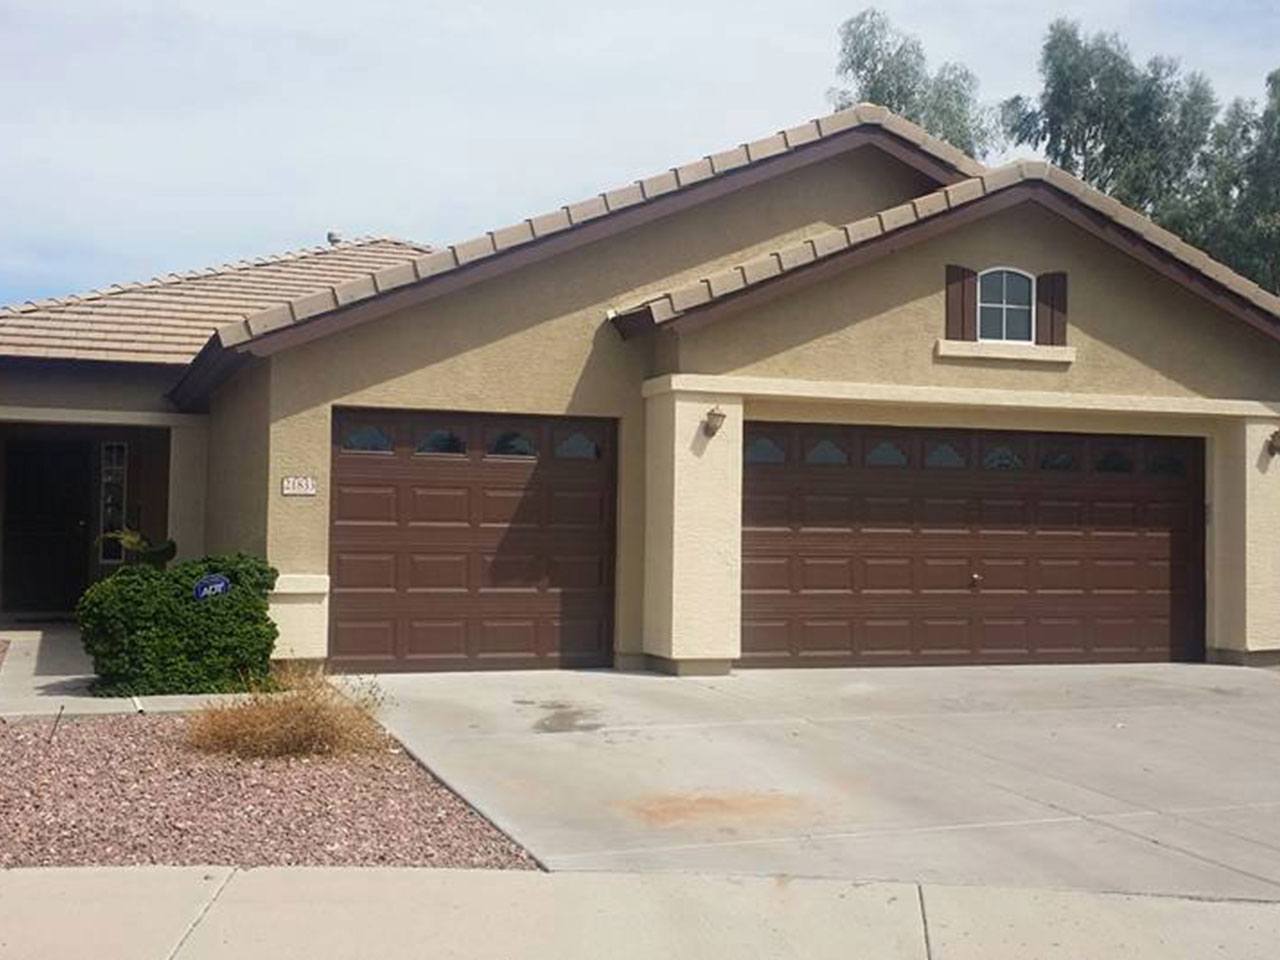 Residential exterior transformed by Arizona Painting Company: A newly painted brown home, displaying their expert craftsmanship and attention to detail.